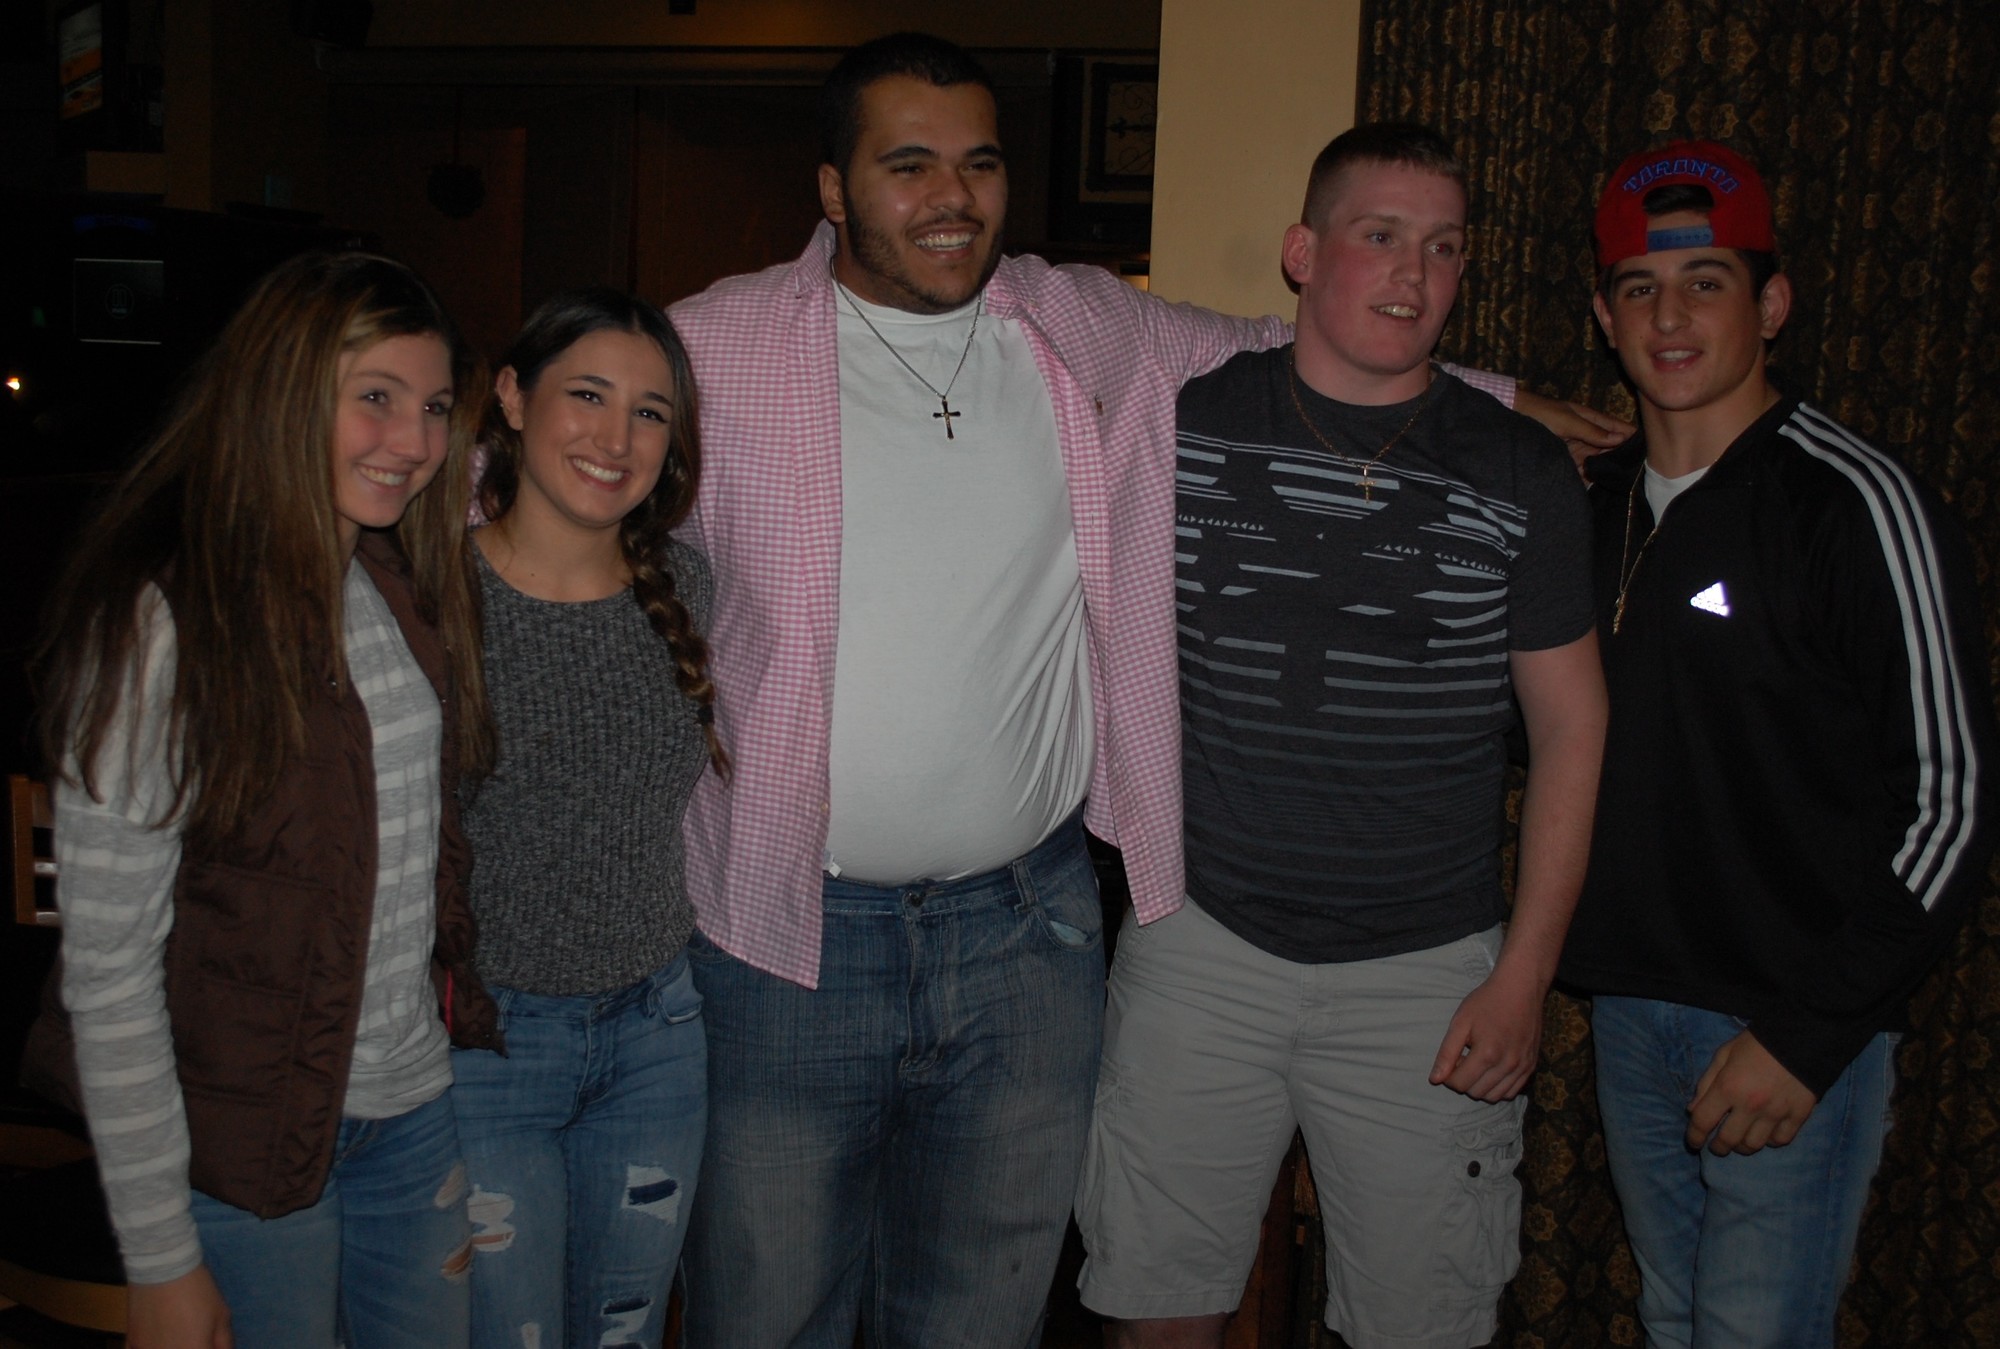 Nico Fiorello was joined by the friends who were with him at the beach, from left, Nicole Esposito, Alyssa Cappello, Peter Couvaris and Tom Sabatino.